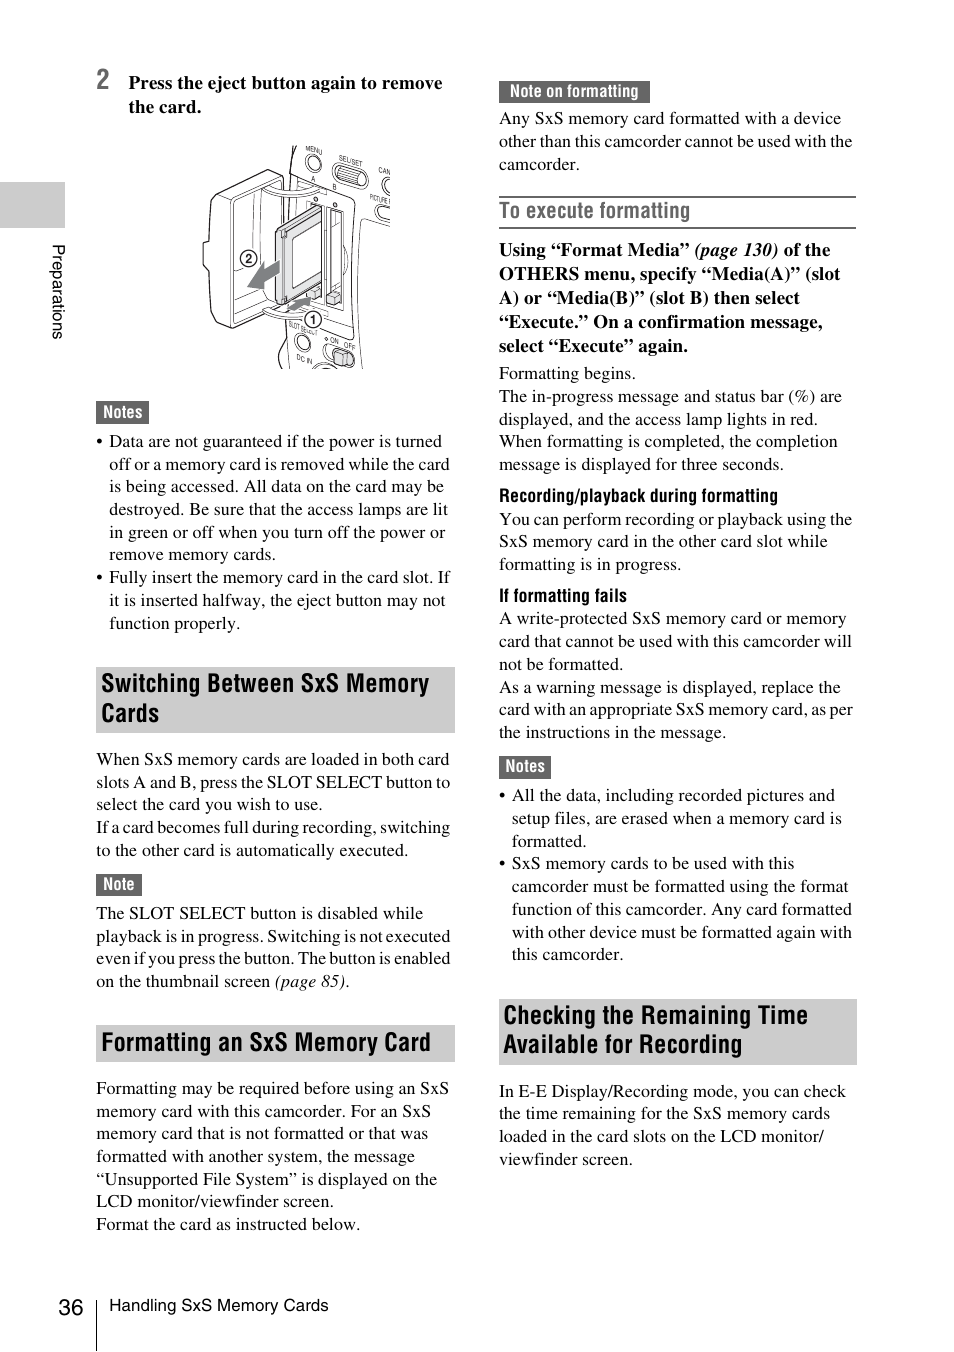 Switching between sxs memory cards, Formatting an sxs memory card, Recording | Sony PMW-F3K User Manual | Page 36 / 164